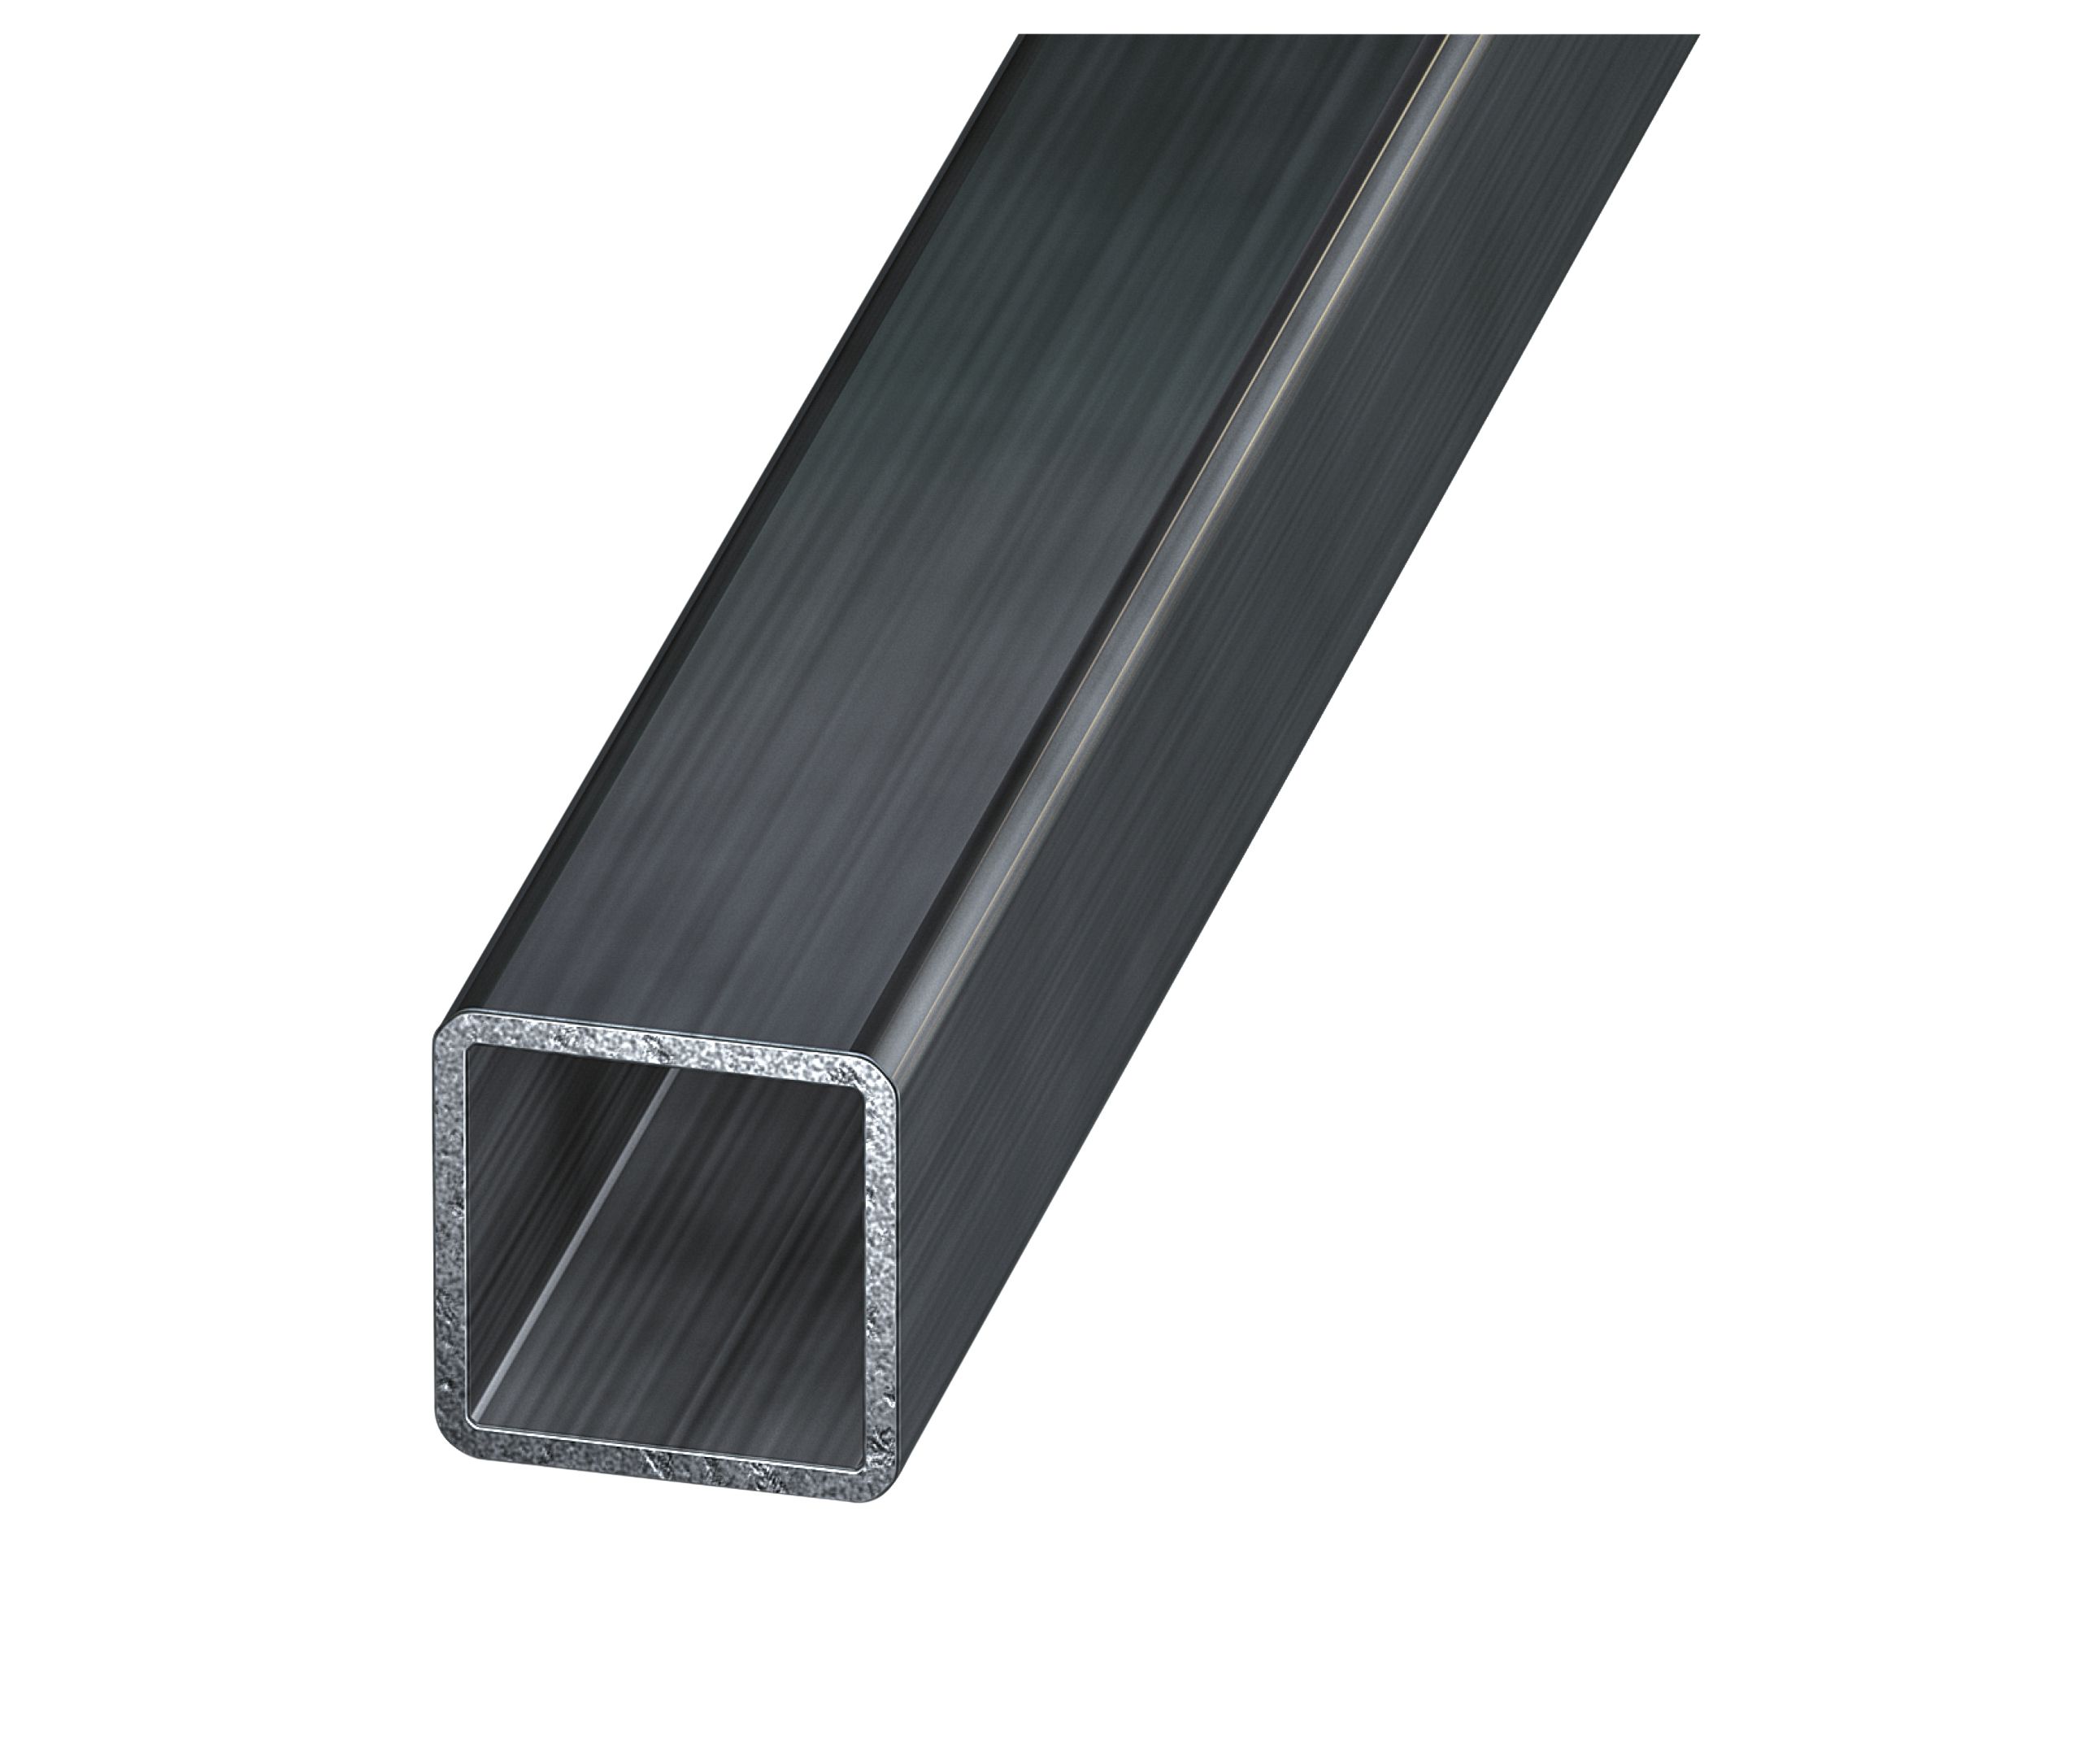 Varnished Cold-rolled steel Square Tube, (L)1m (W)30mm (T)1.25mm